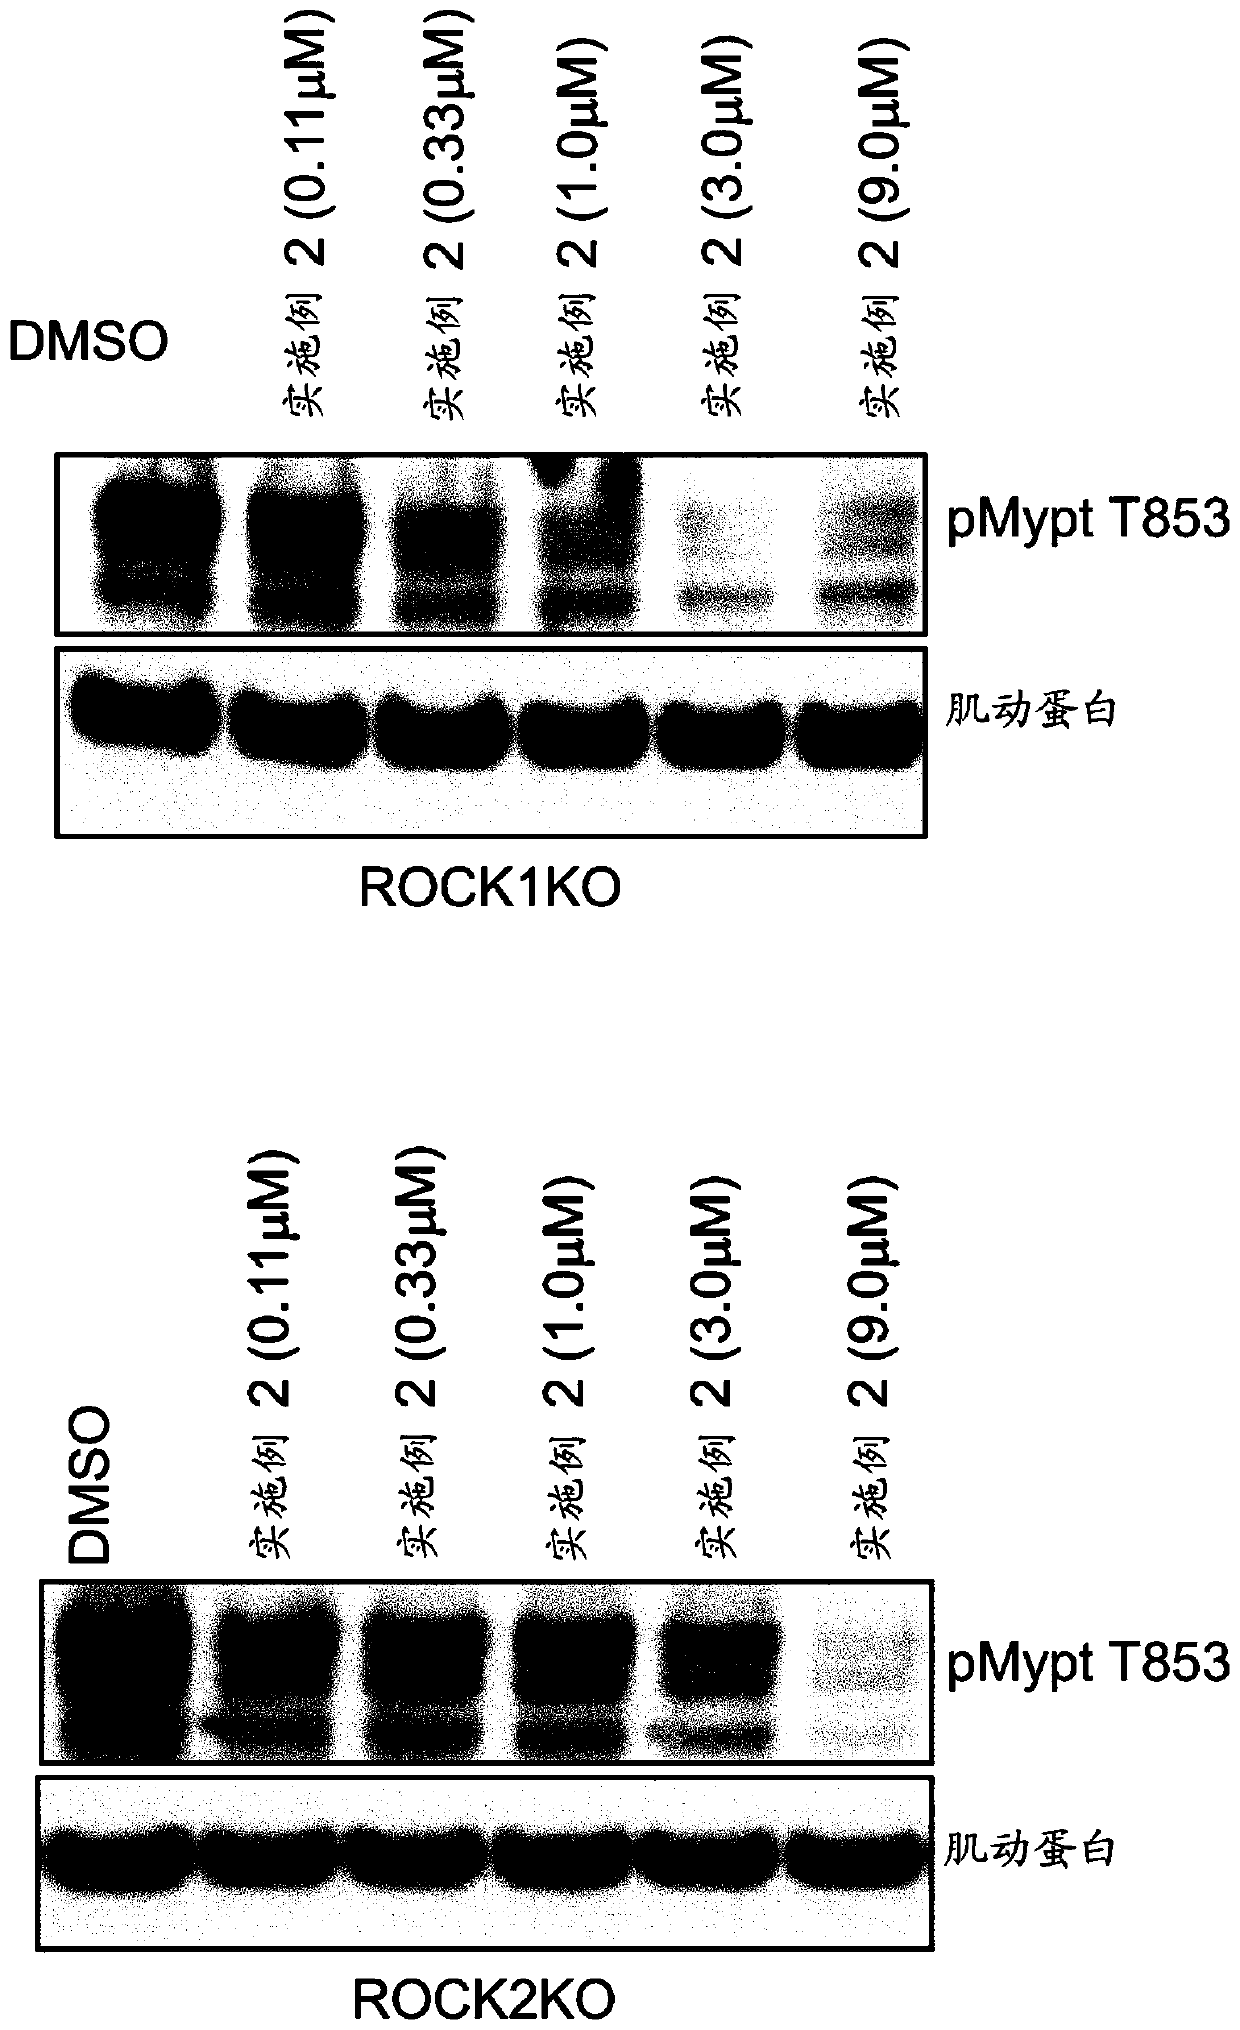 Inhibitors of rho associated coiled-coil containing protein kinase